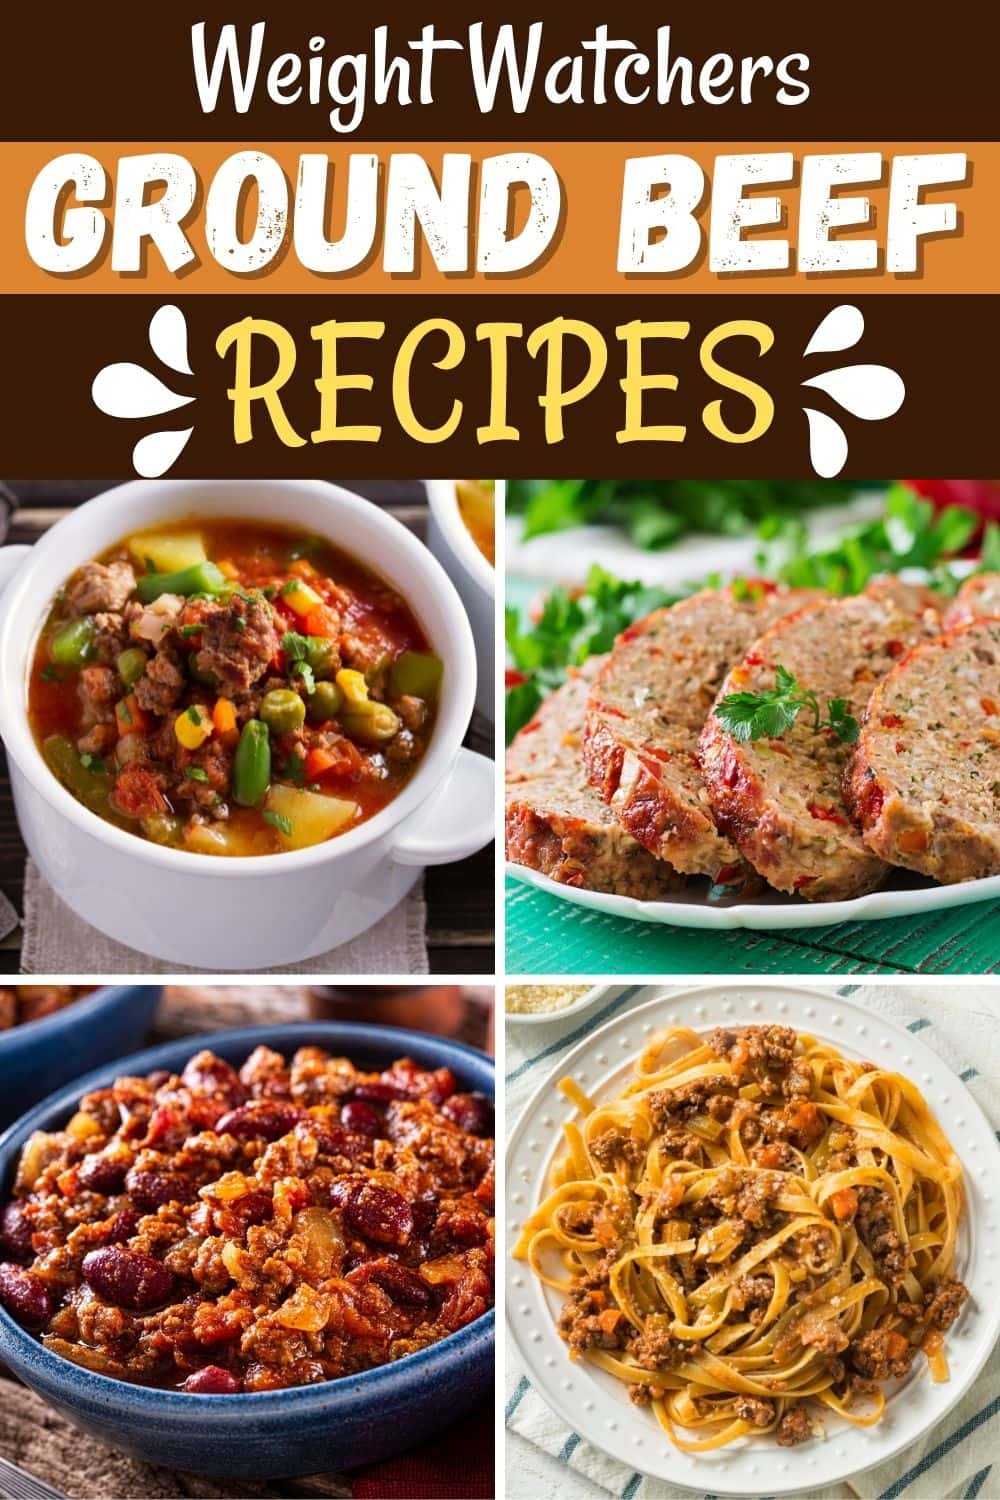 17 Easy Weight Watchers Ground Beef Recipes - Insanely Good